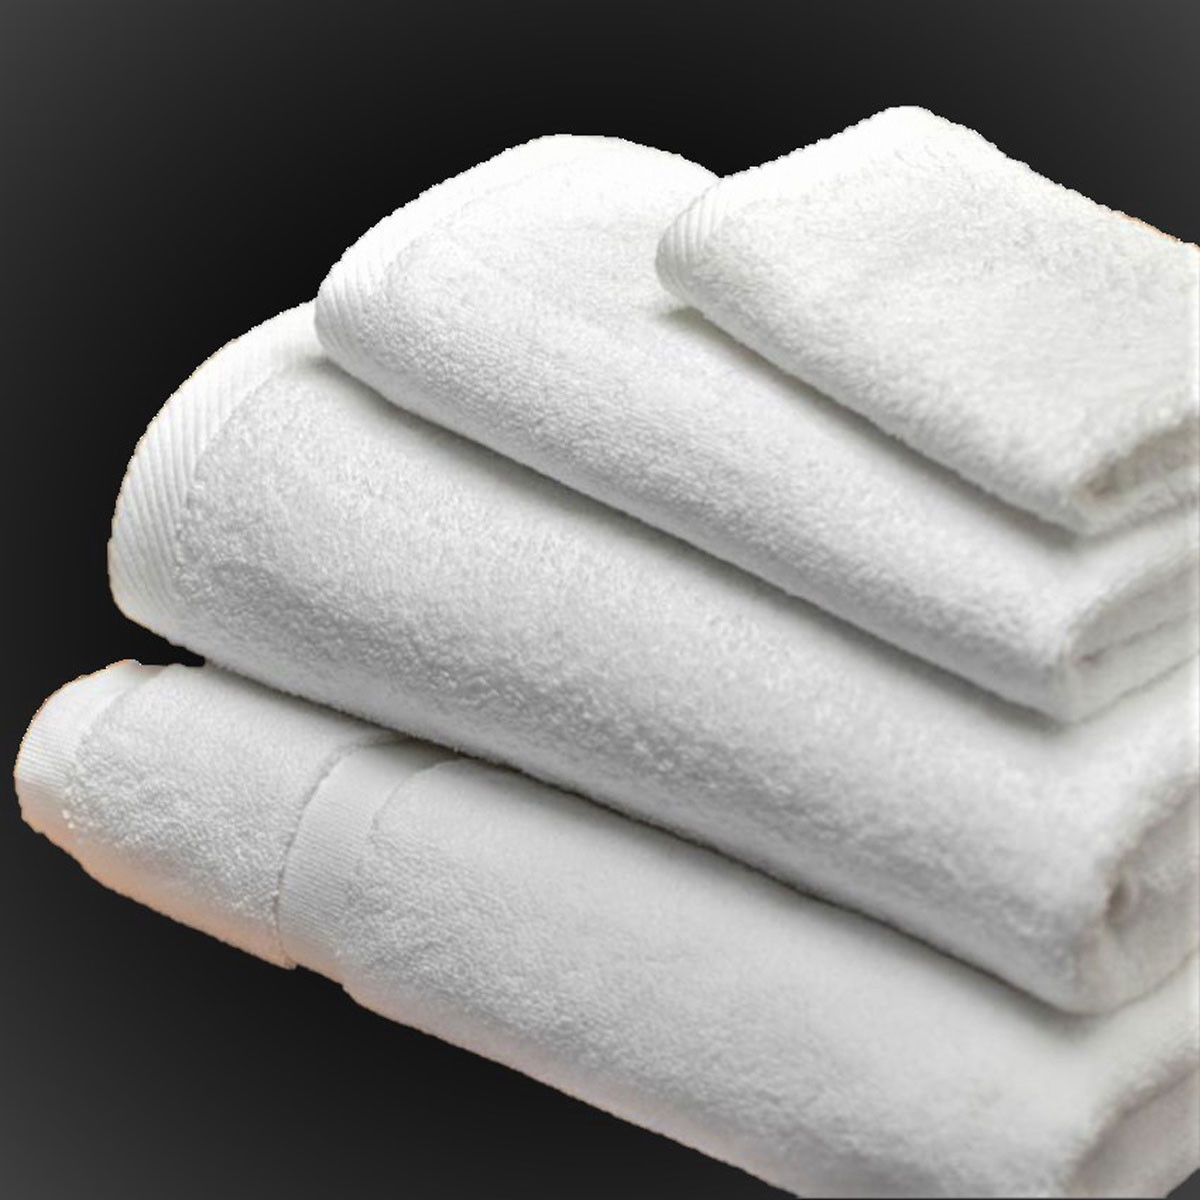 Do golden mills towels dry quickly?